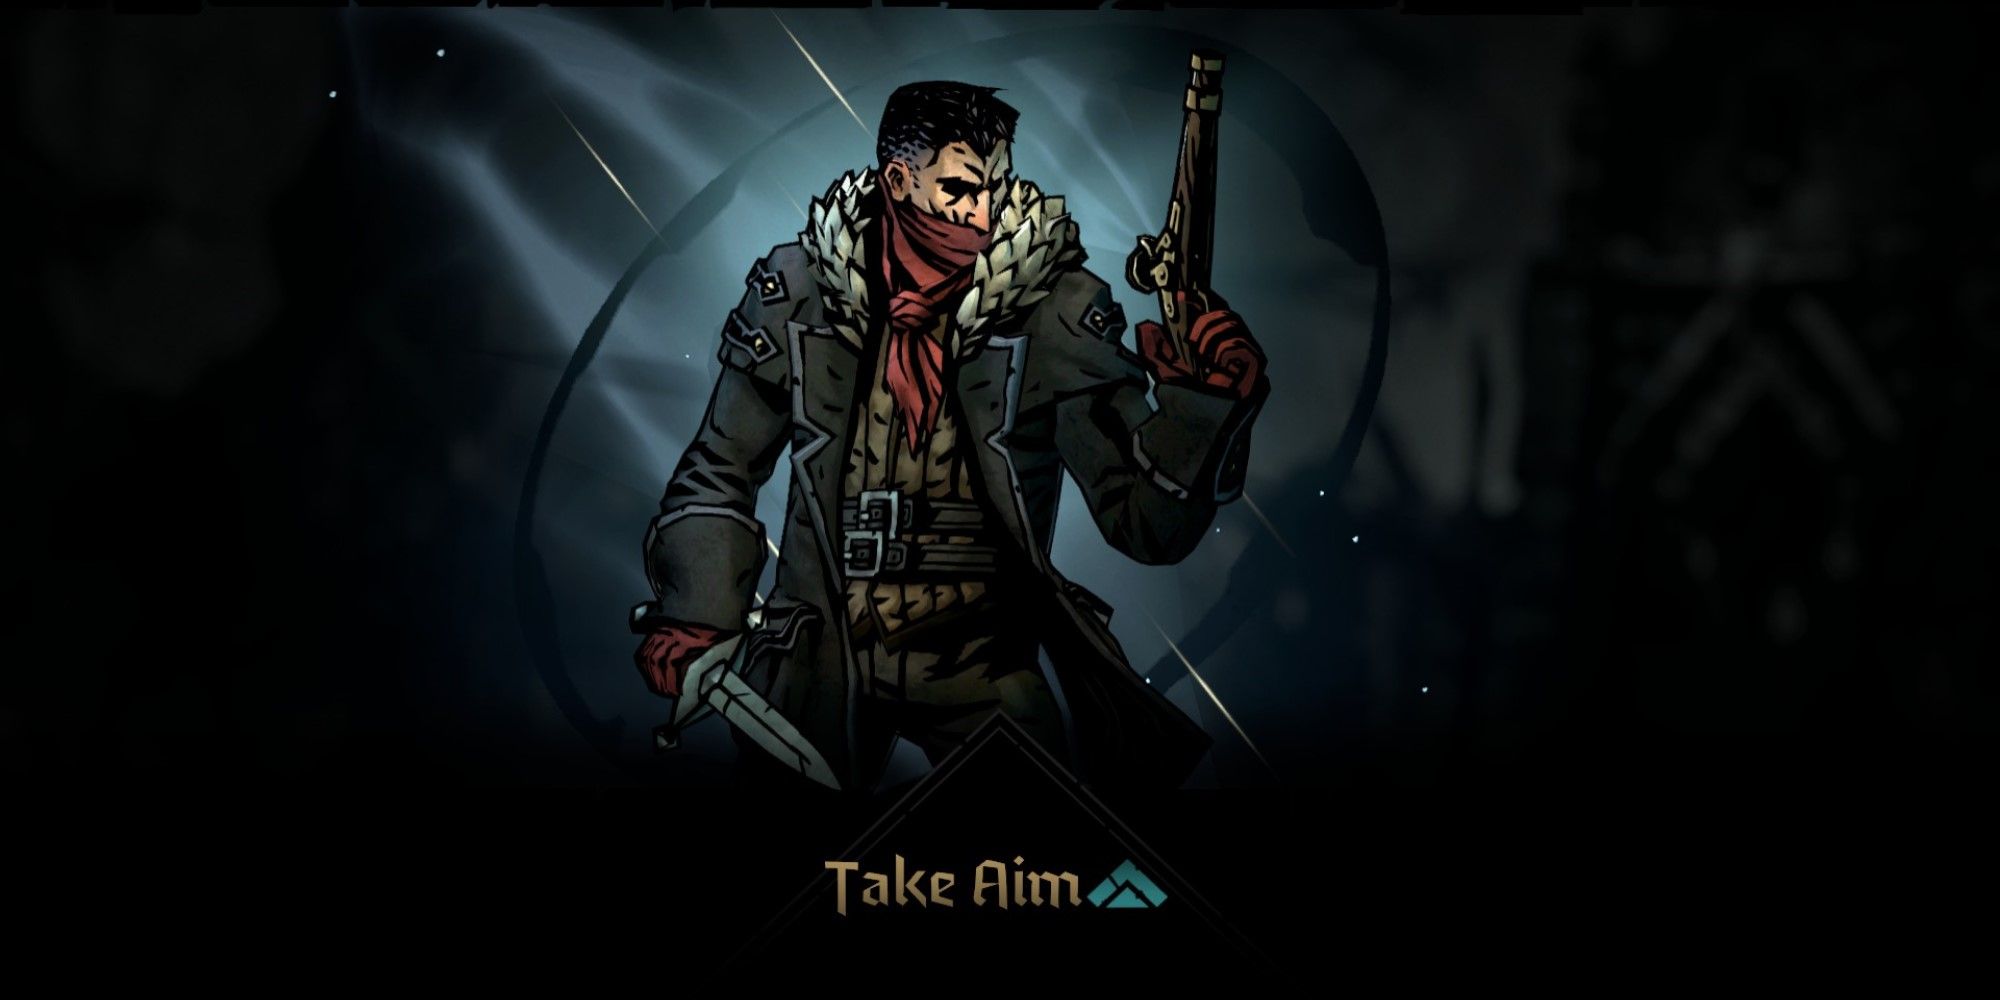 A screenshot of the Take Aim Skill being used in Darkest Dungeon 2